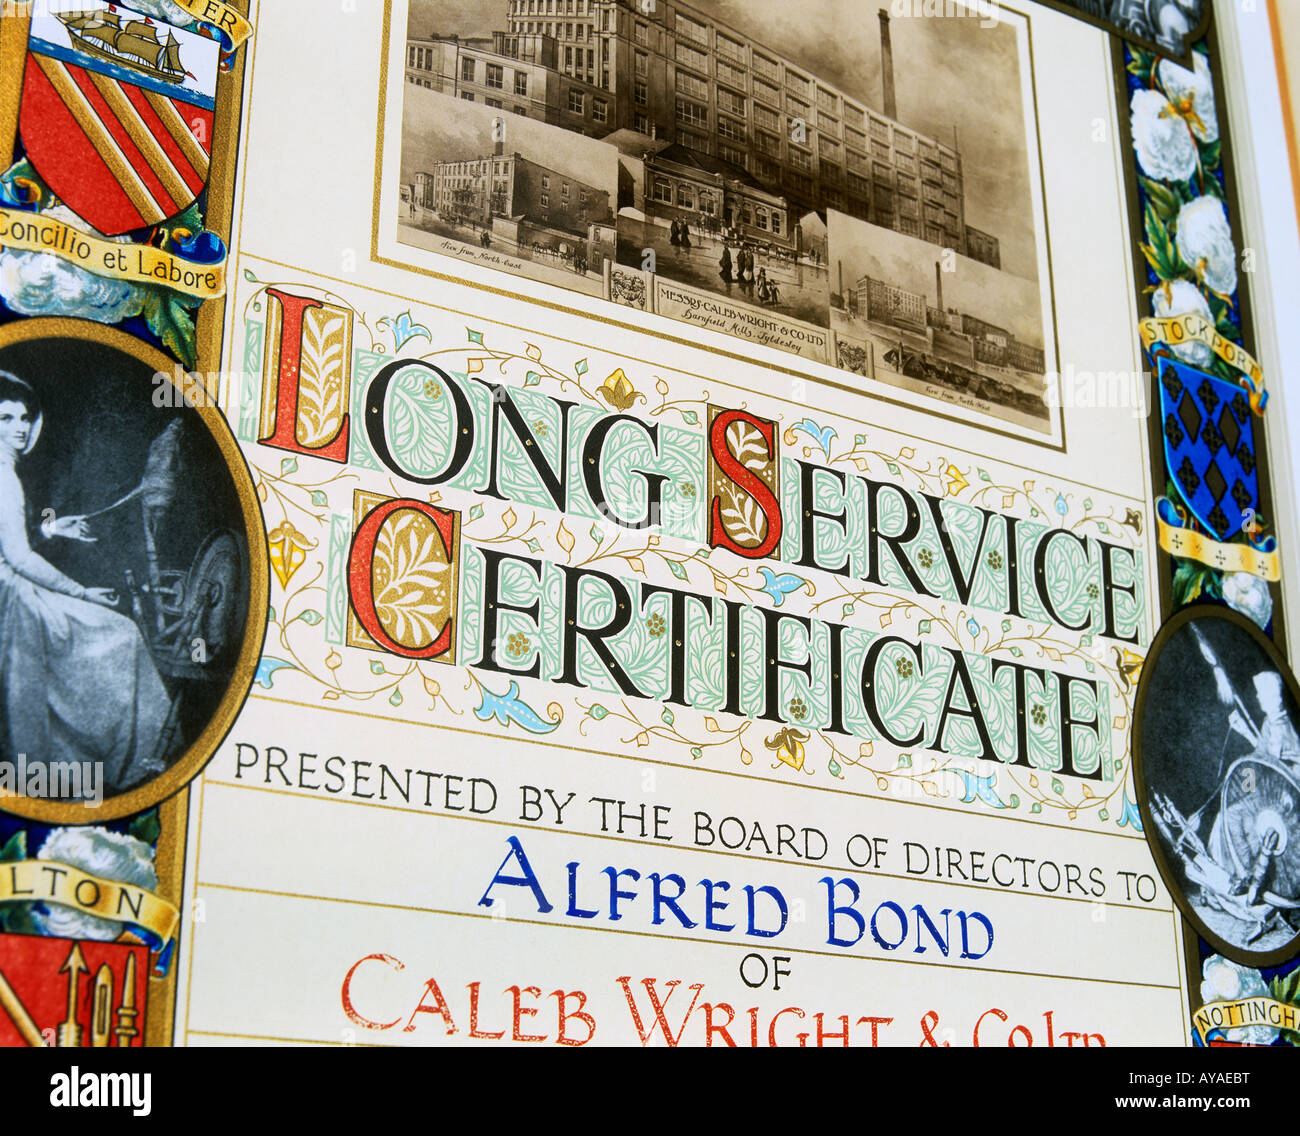 A photo of a long service certificate awarded in 1929 to an employee for working 40 years for the same company. Stock Photo